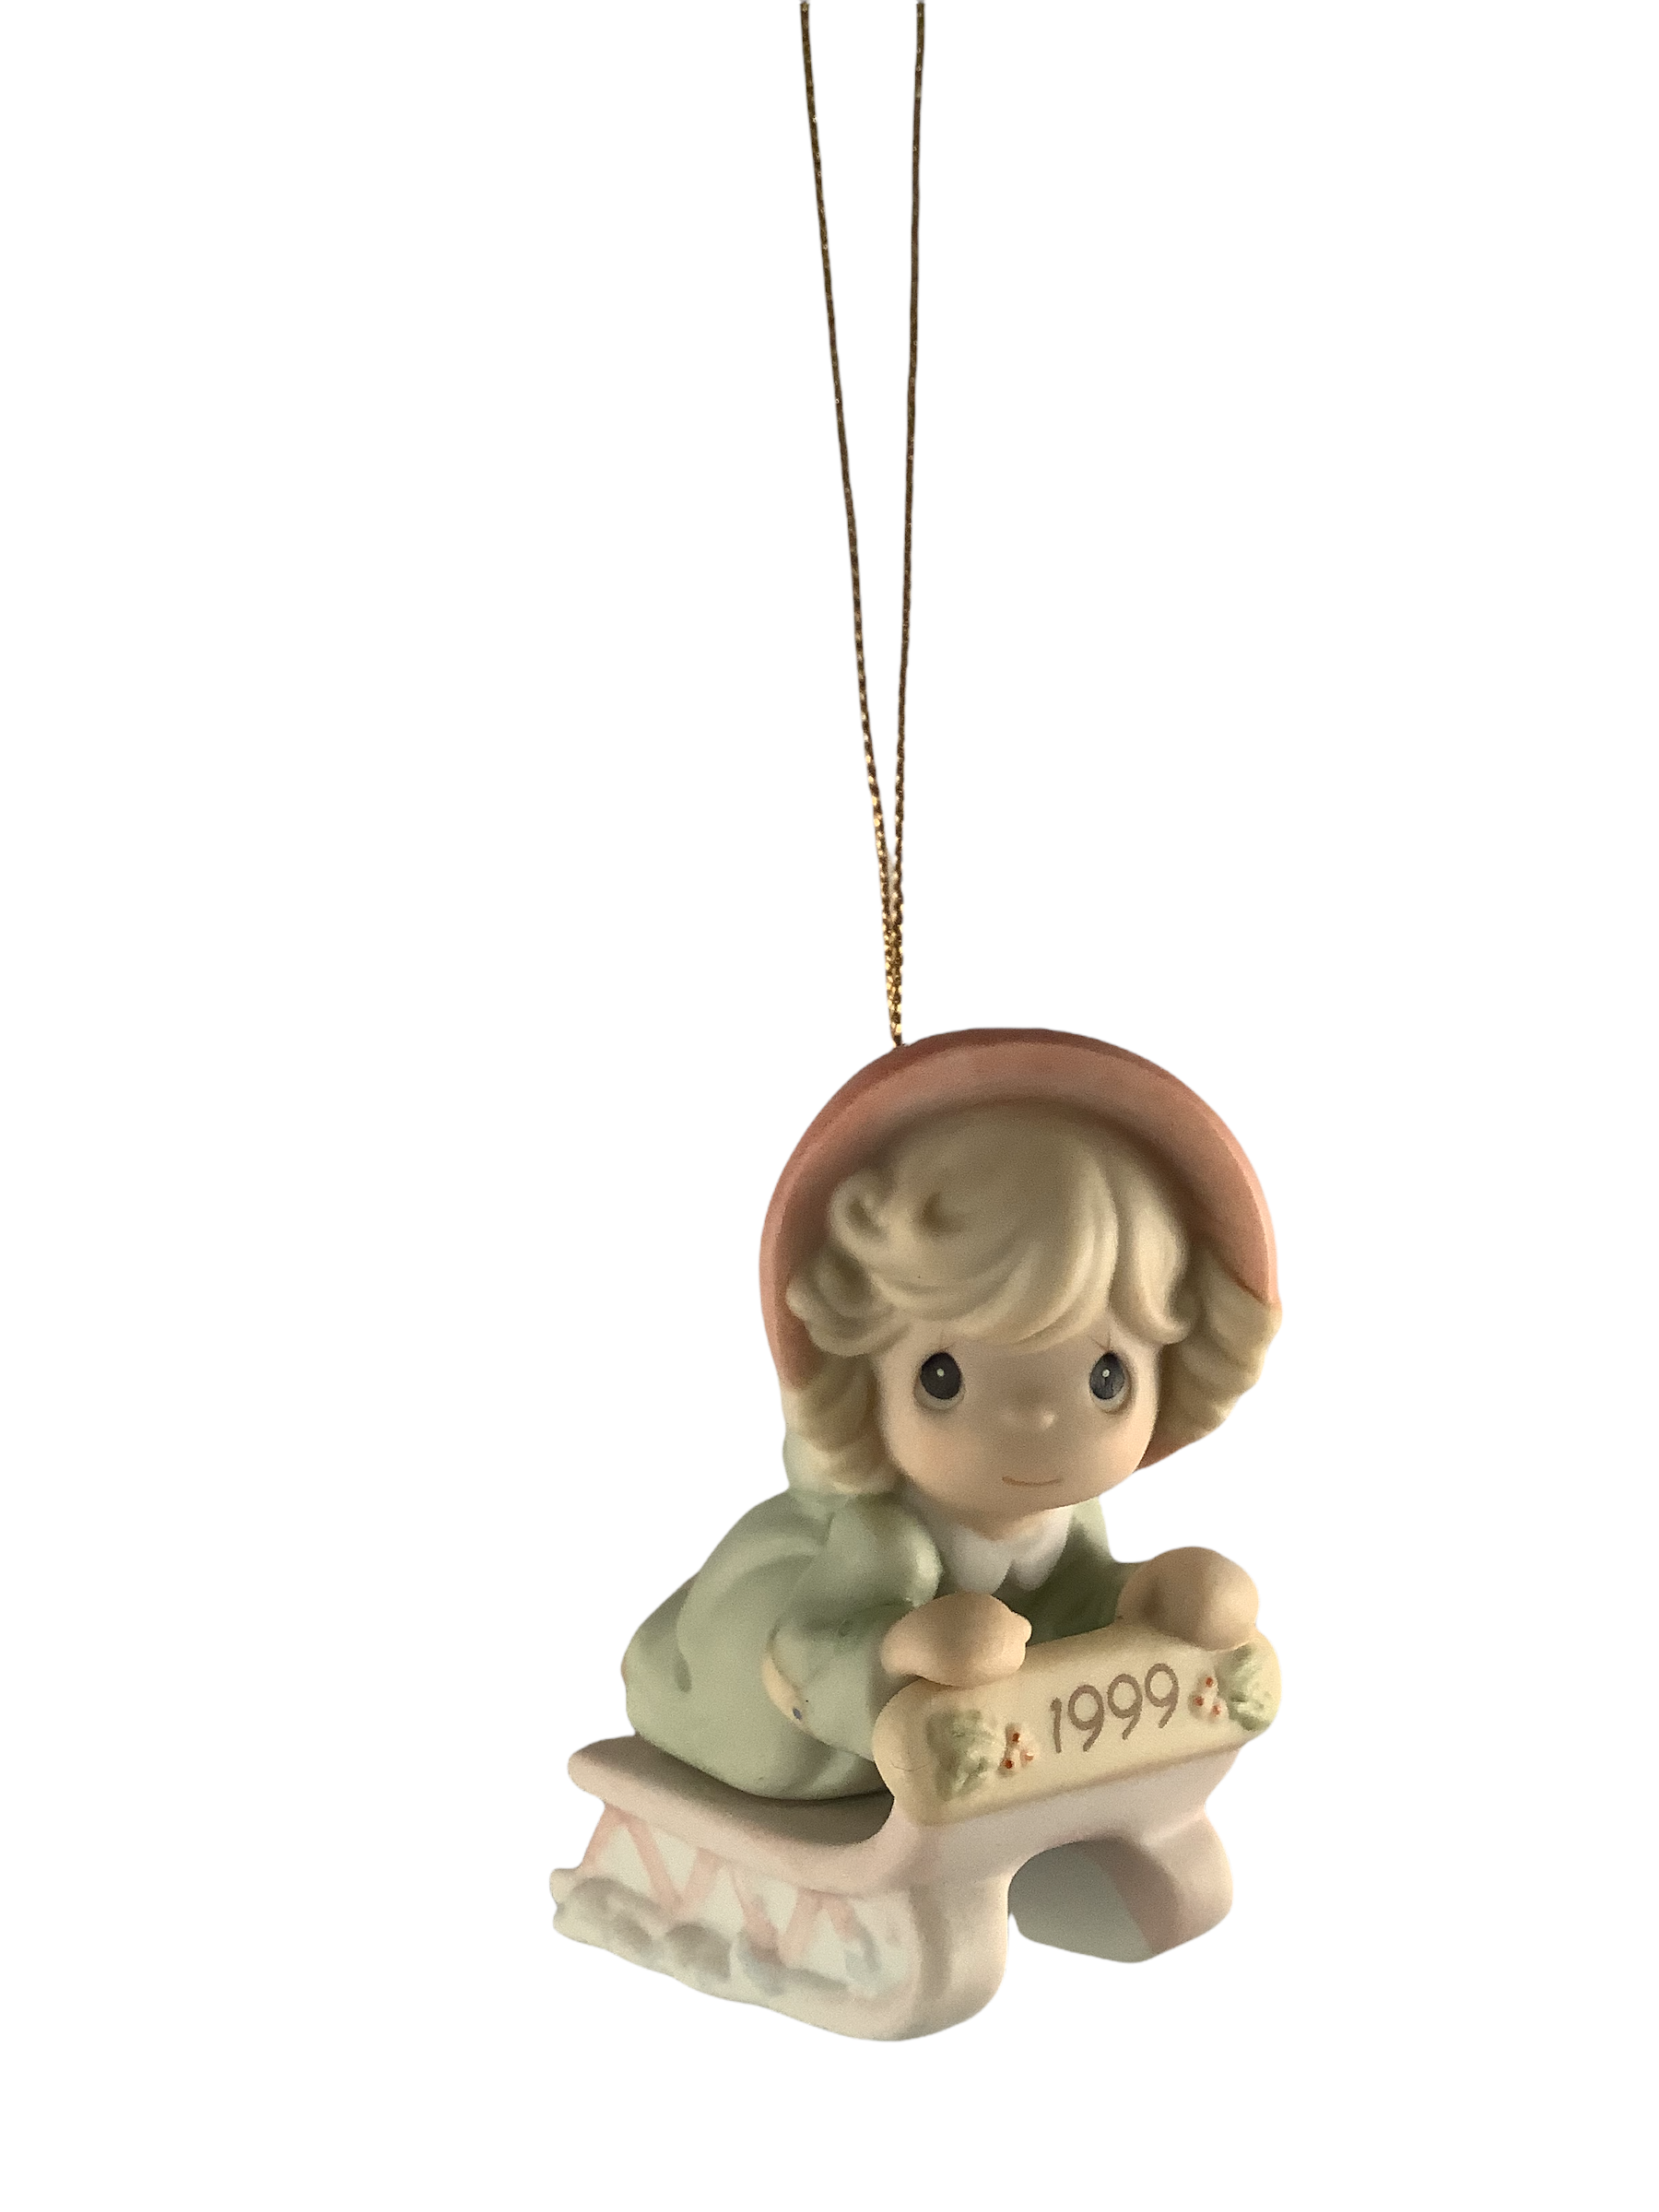 Slide Into The Next Millennium With Joy - 1999 Dated Annual Precious Moment Ornament